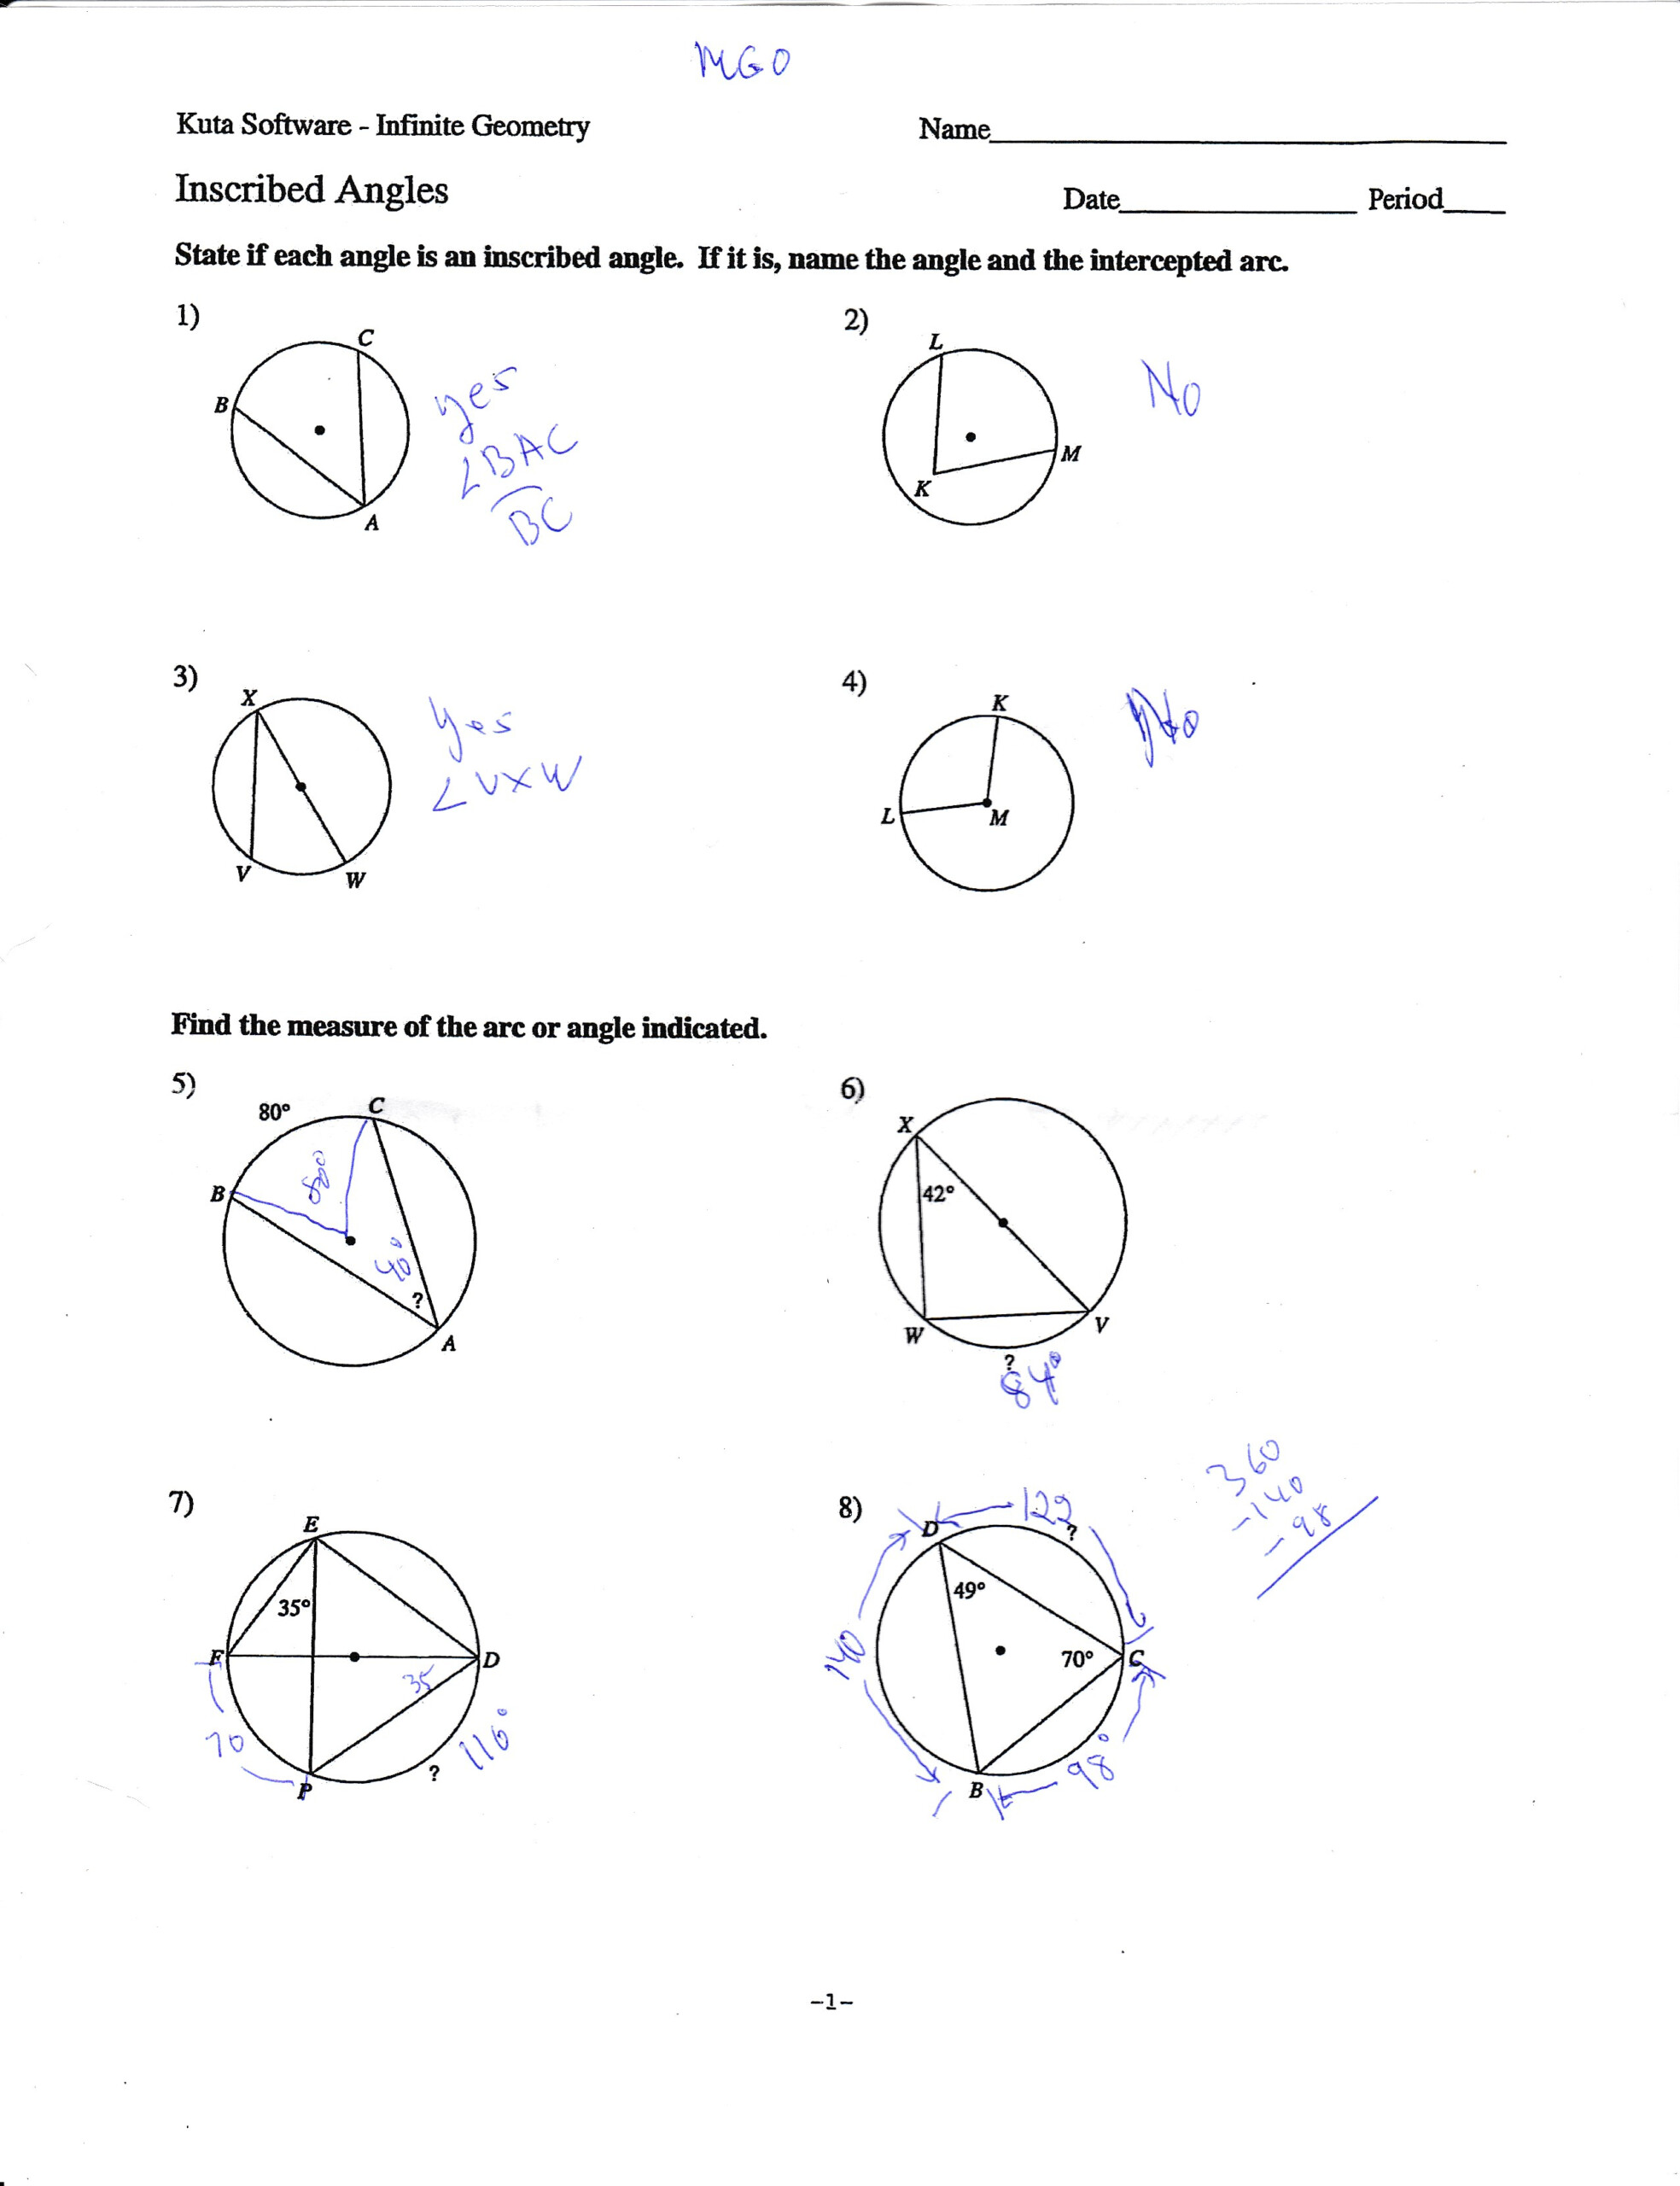 angle-tangle-central-and-inscribed-angles-worksheet-answers